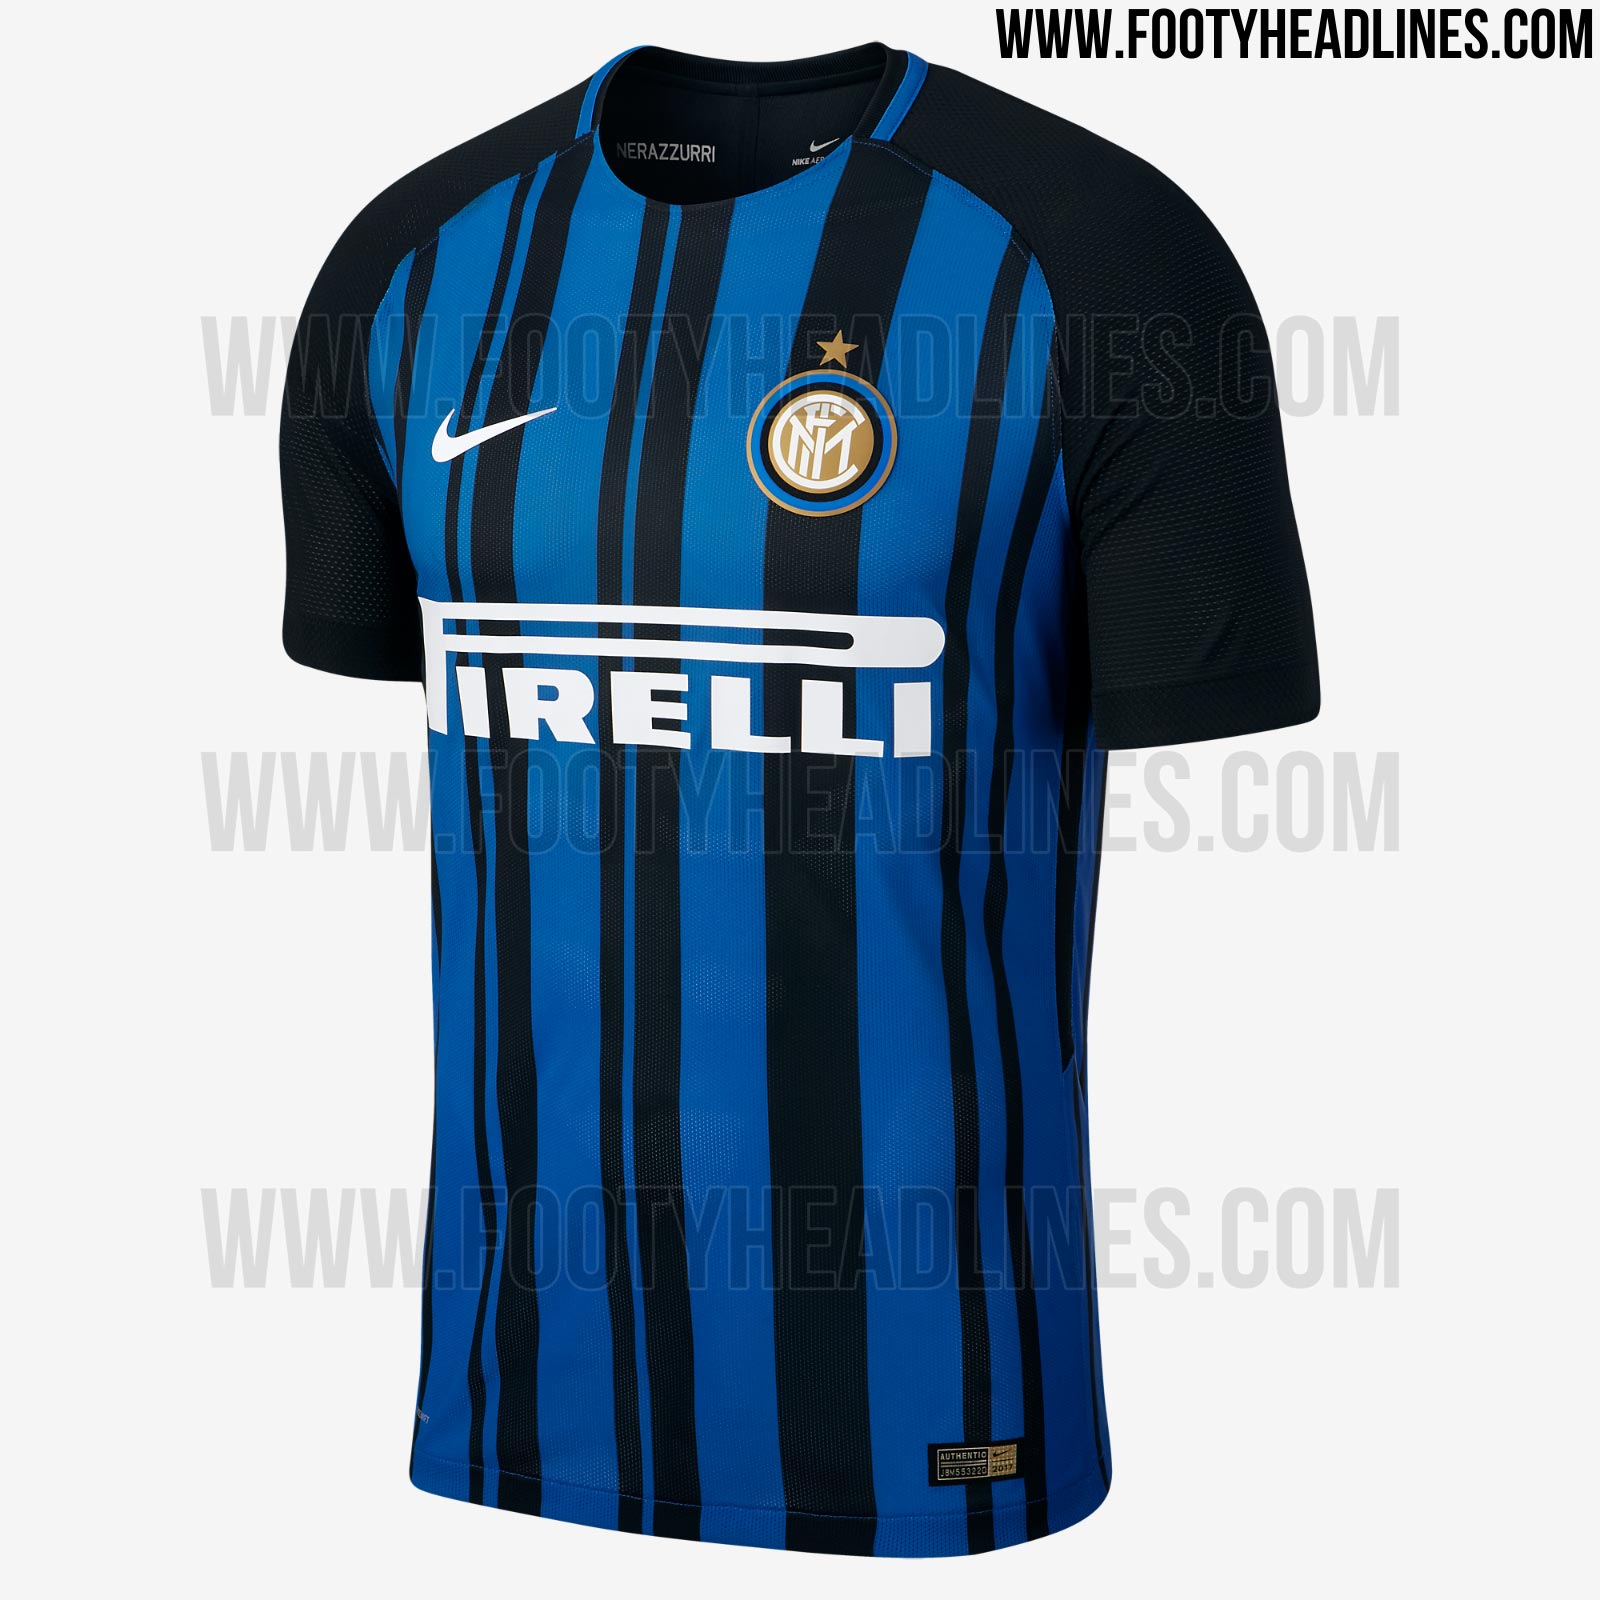 All New Nike Inter Milan 17 18 Kit Font Released Footy Headlines